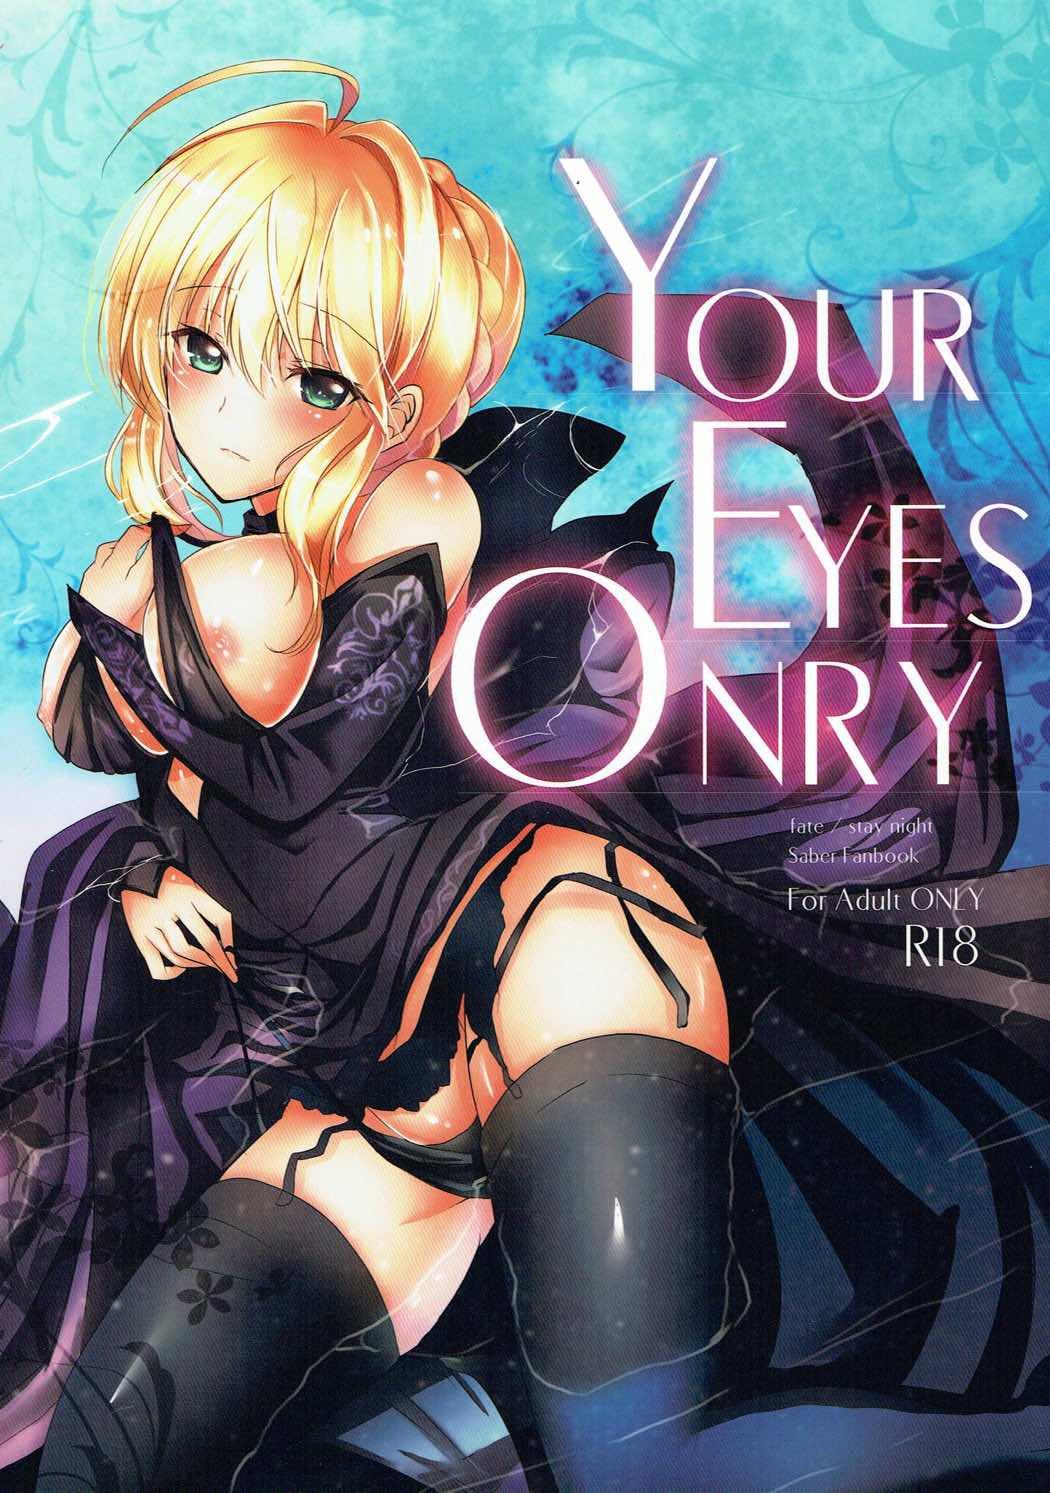 Romantic YOUR EYES ONRY - Fate stay night Virgin - Page 1